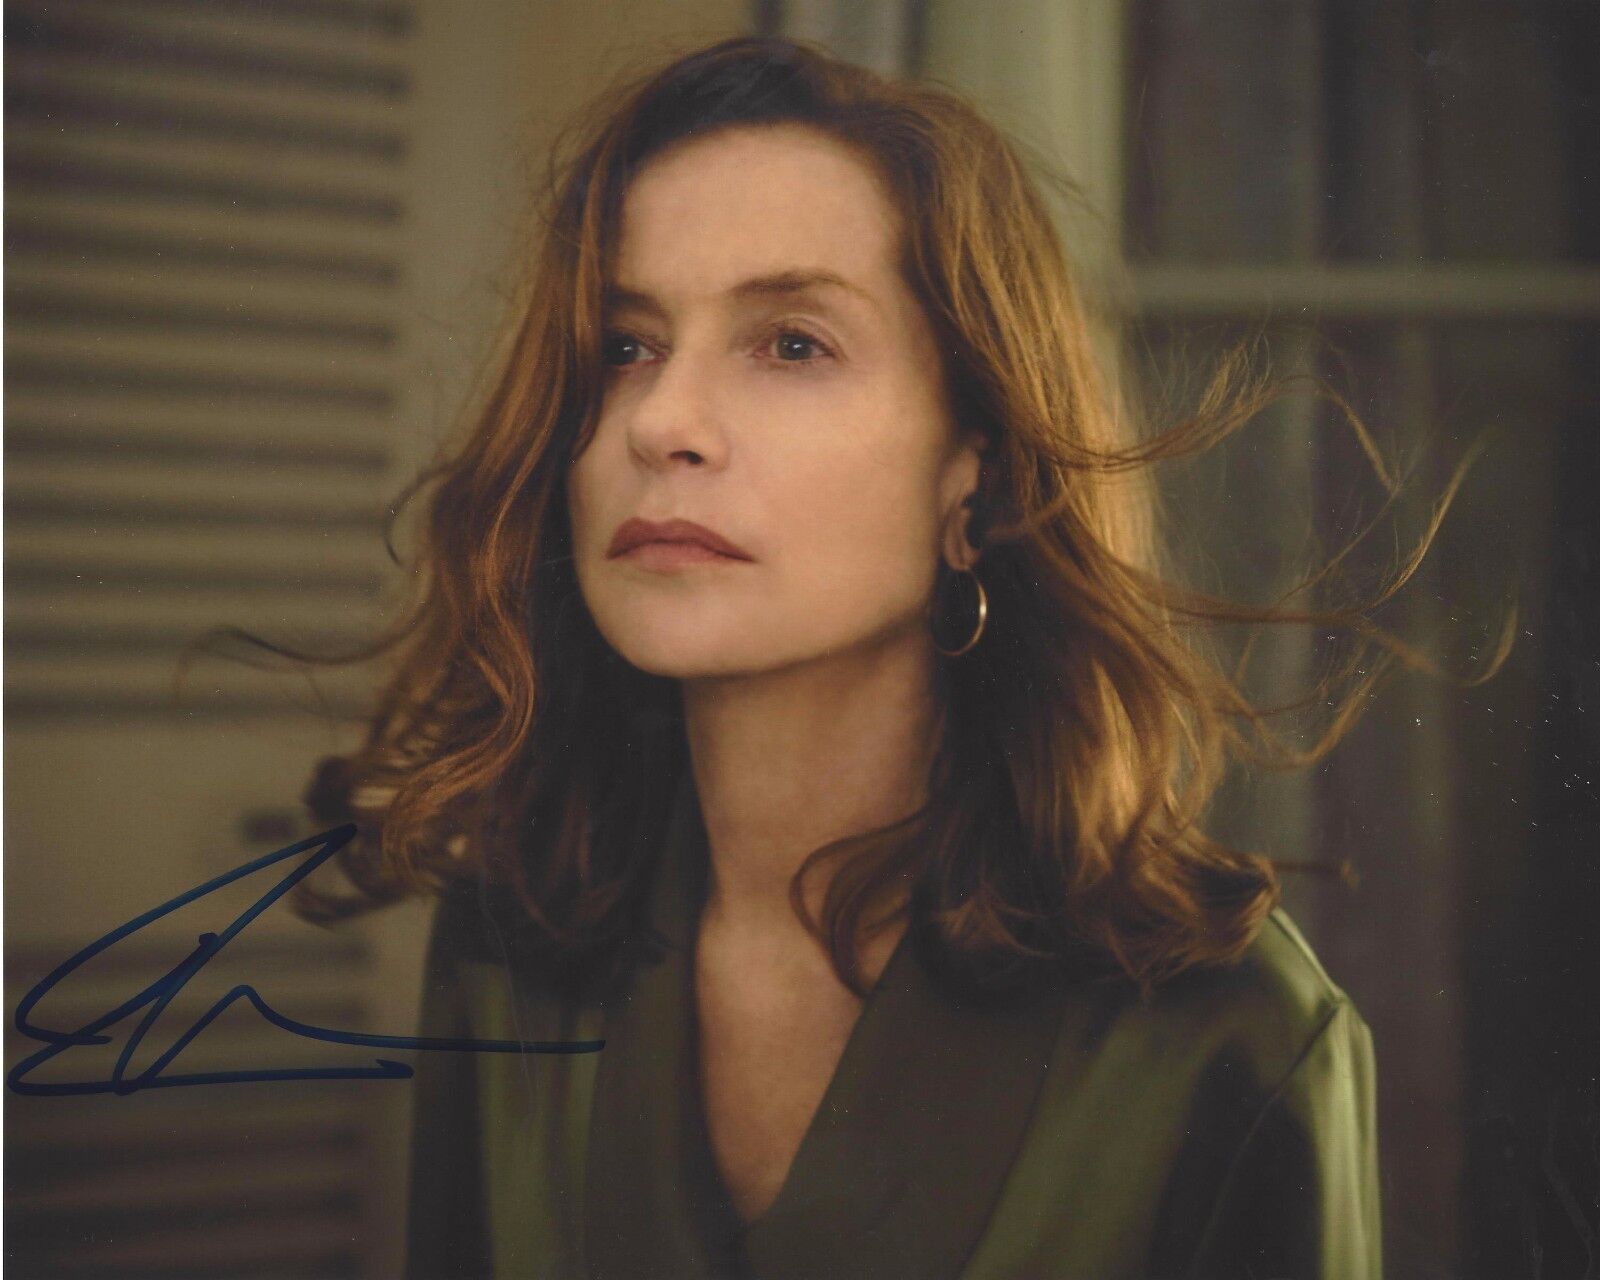 ACTRESS ISABELLE HUPPERT SIGNED AMOUR MOVIE 8X10 Photo Poster painting E W/COA THE PIANO TEACHER